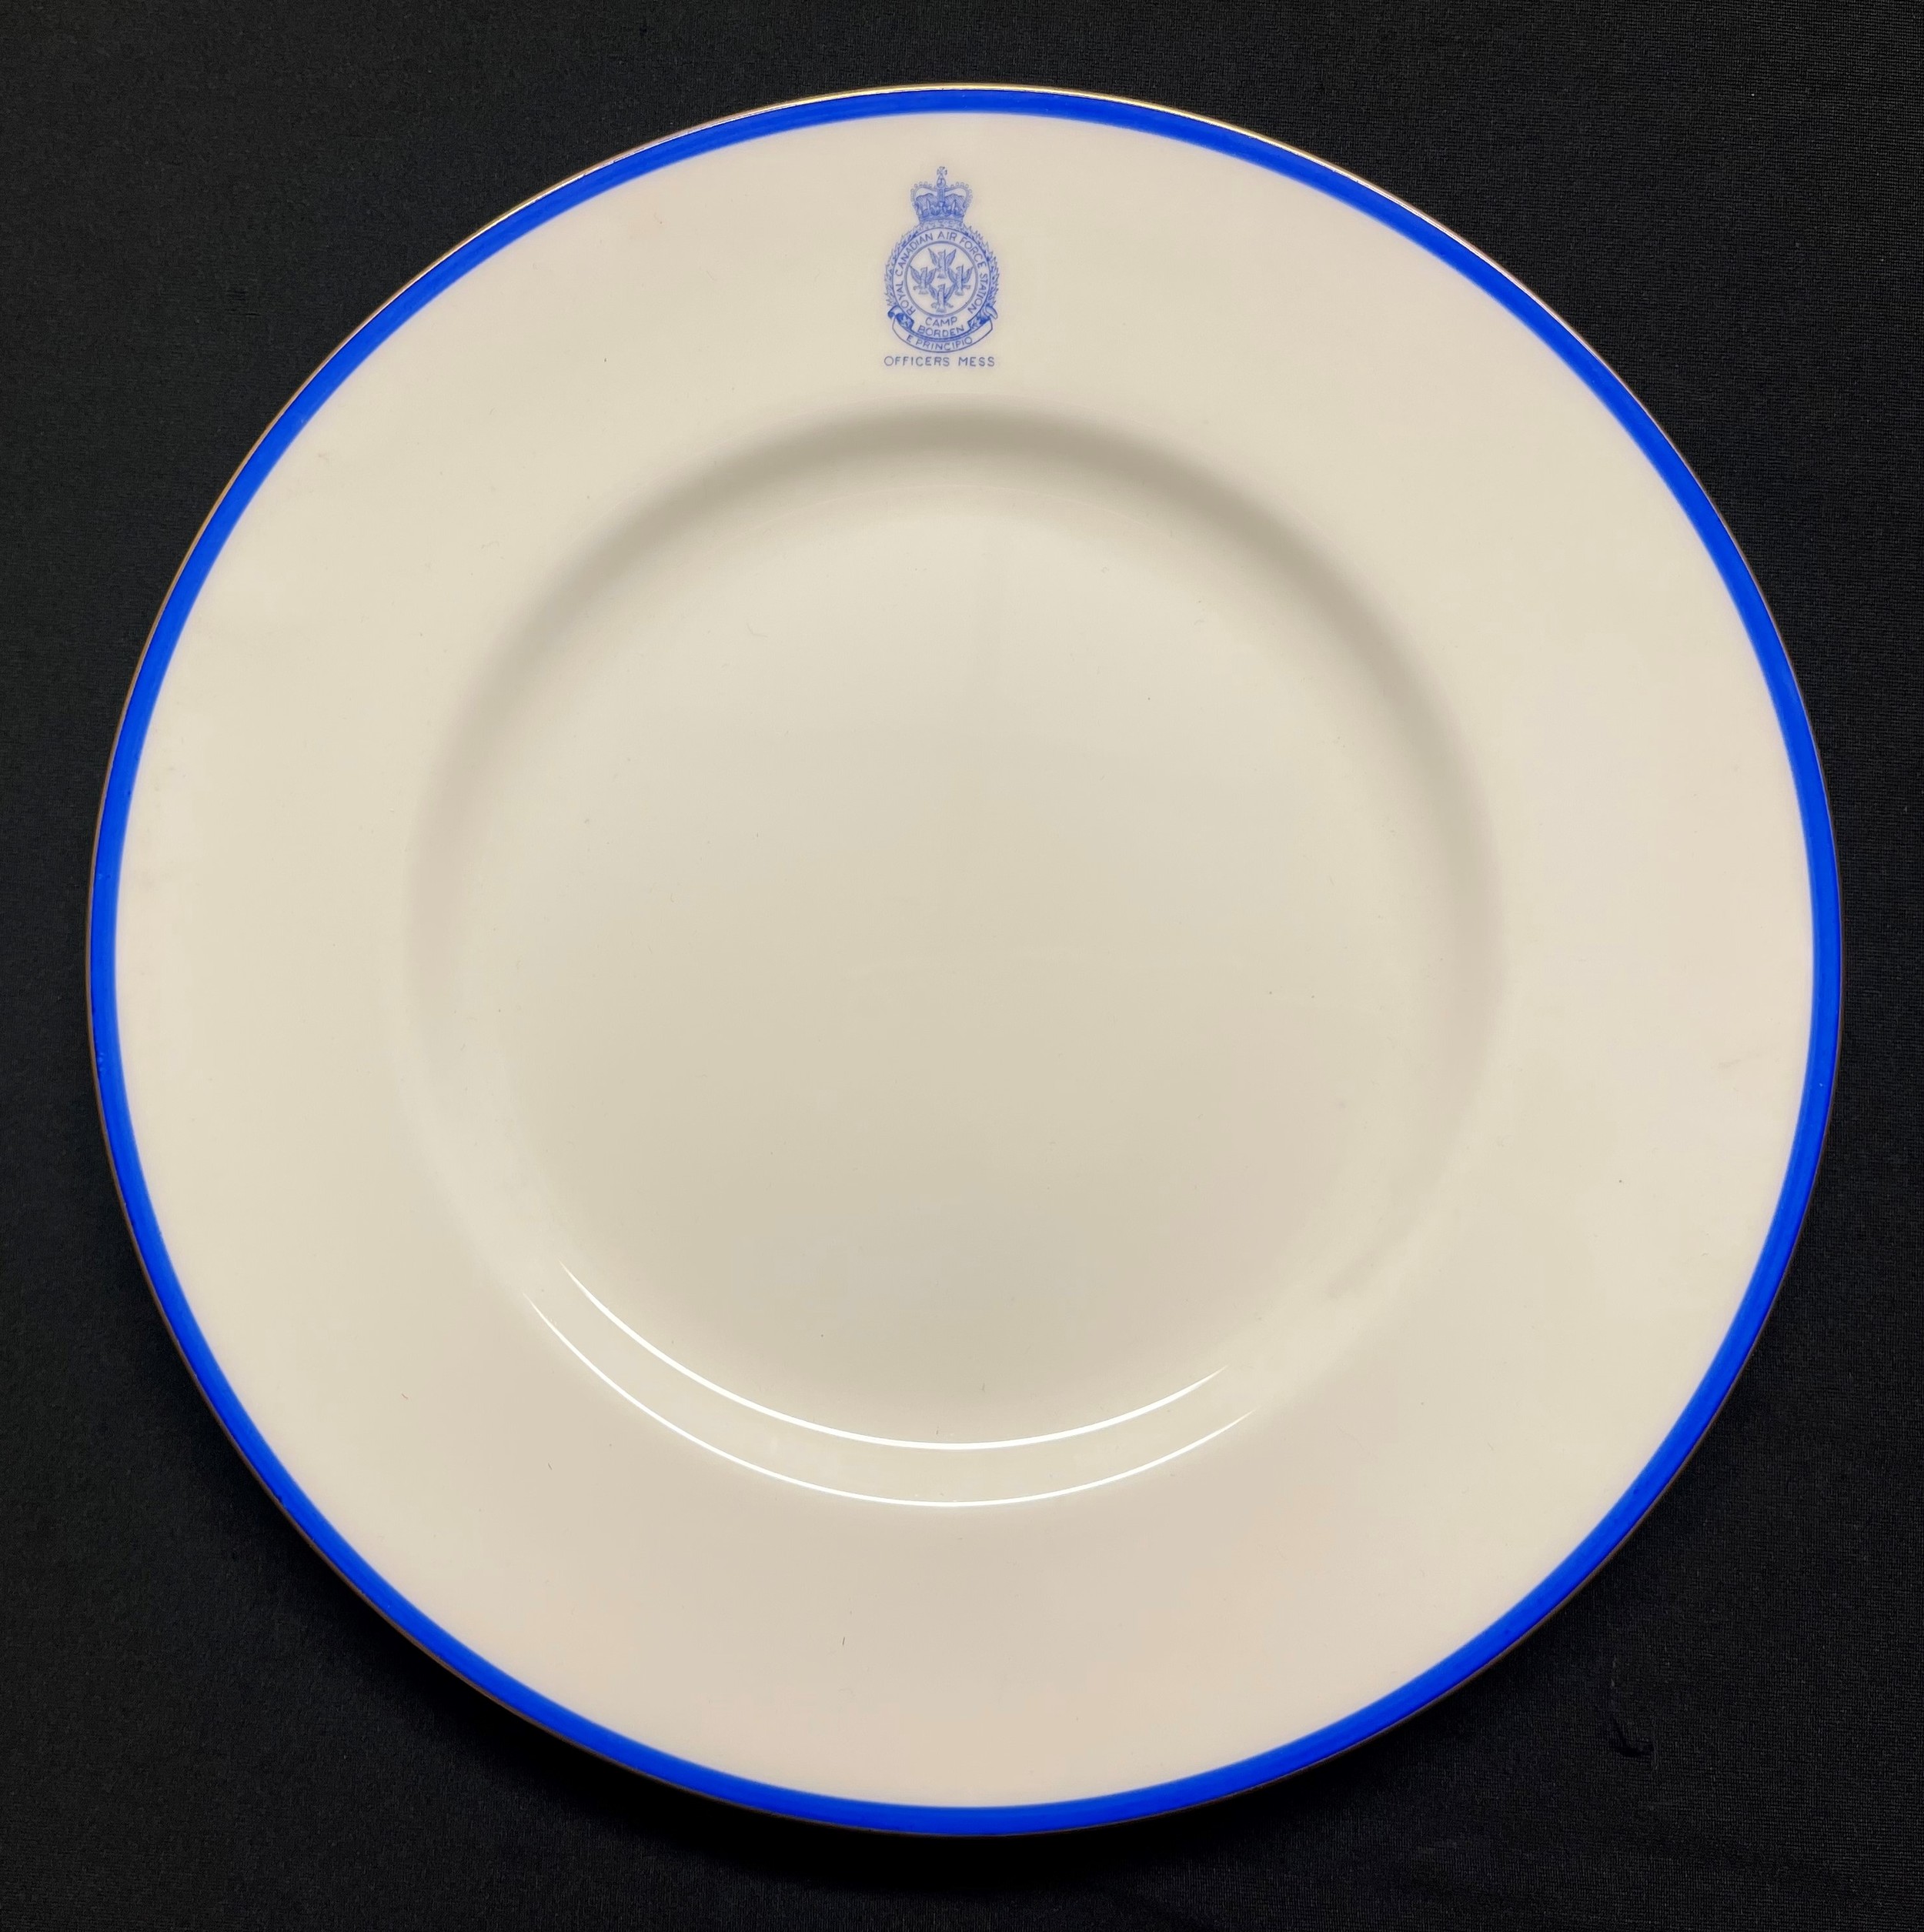 Royal Candian Air Force Officers Mess (Camp Borden) dinner plate, by Minton, with applied paper